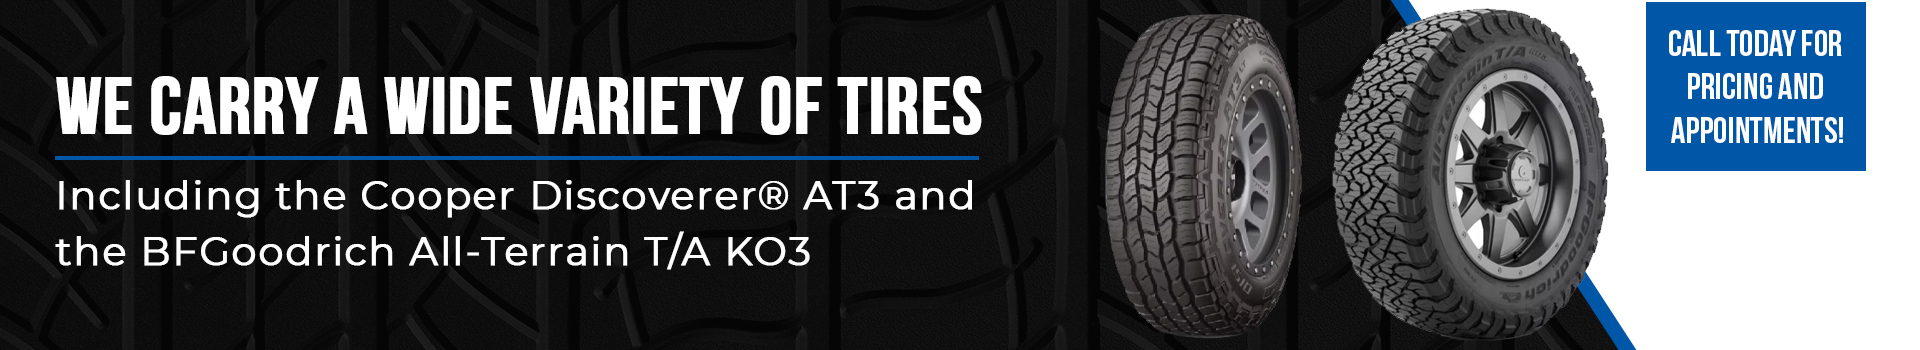 We carry a wide variety of Tires